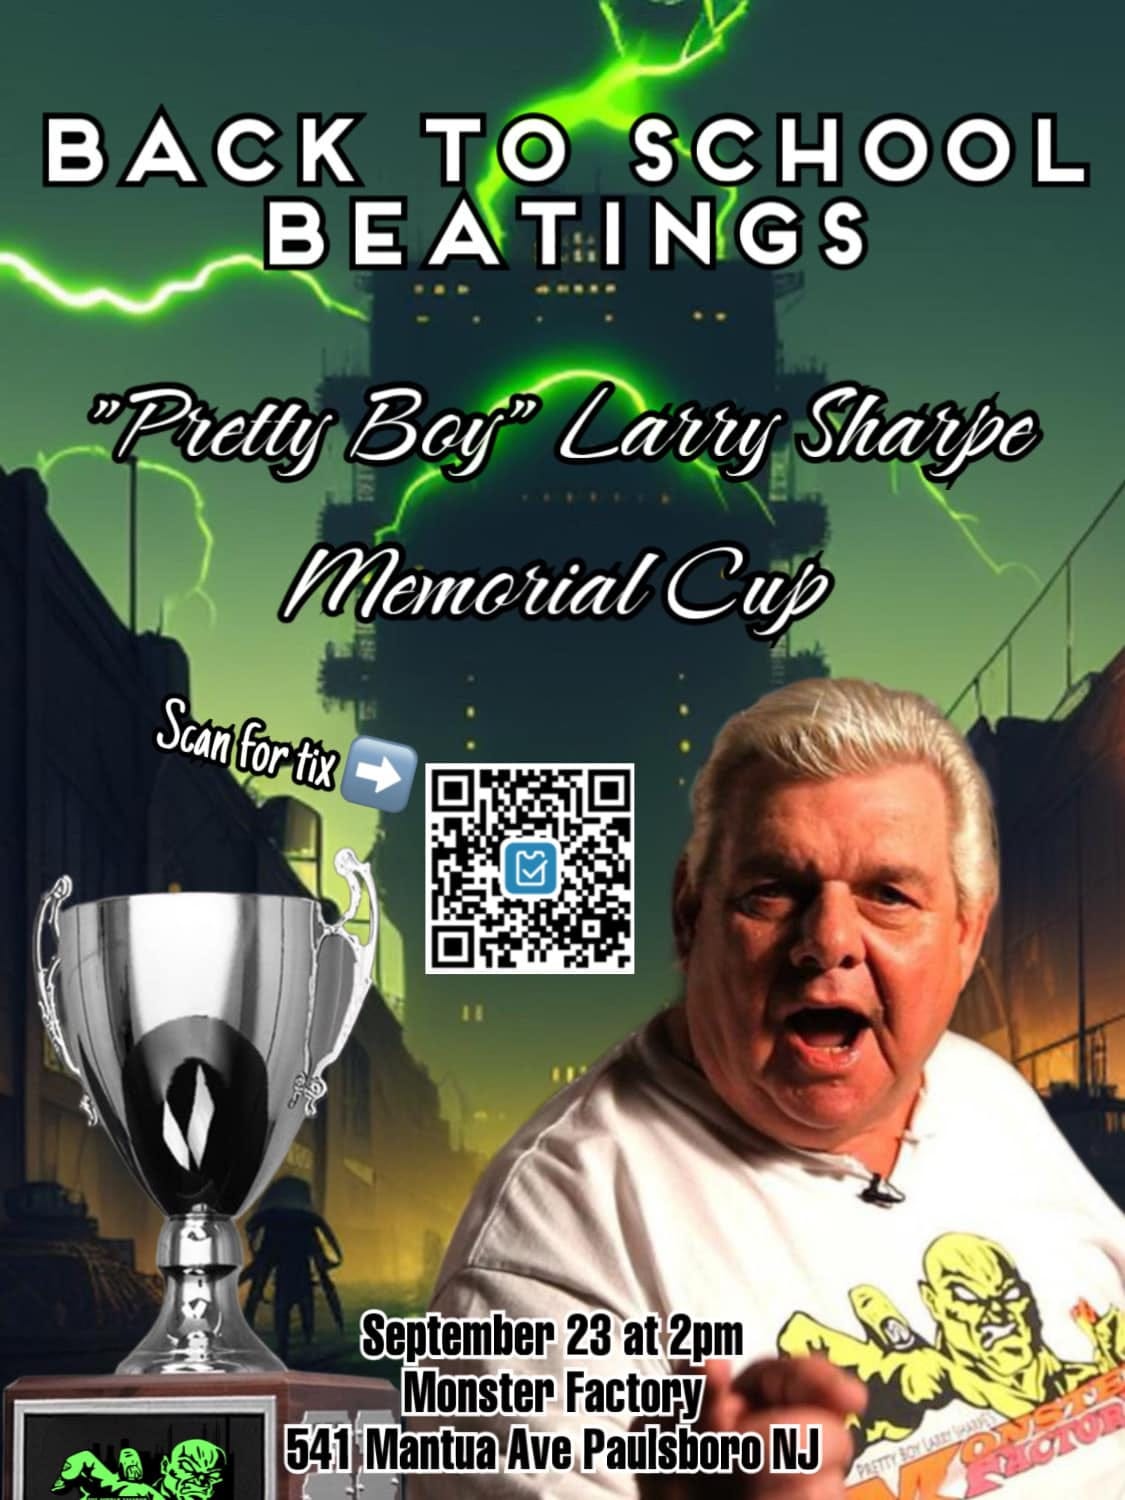 May be an image of 1 person and text that says 'BACK TO SCHOOL BEATINGS "Pretly Boy" Larry Sha Sharpe Memorial Cup Scanfortix September 23 at2pm M Monster Factory 541 Mantua Ave P aulsboro NJ'